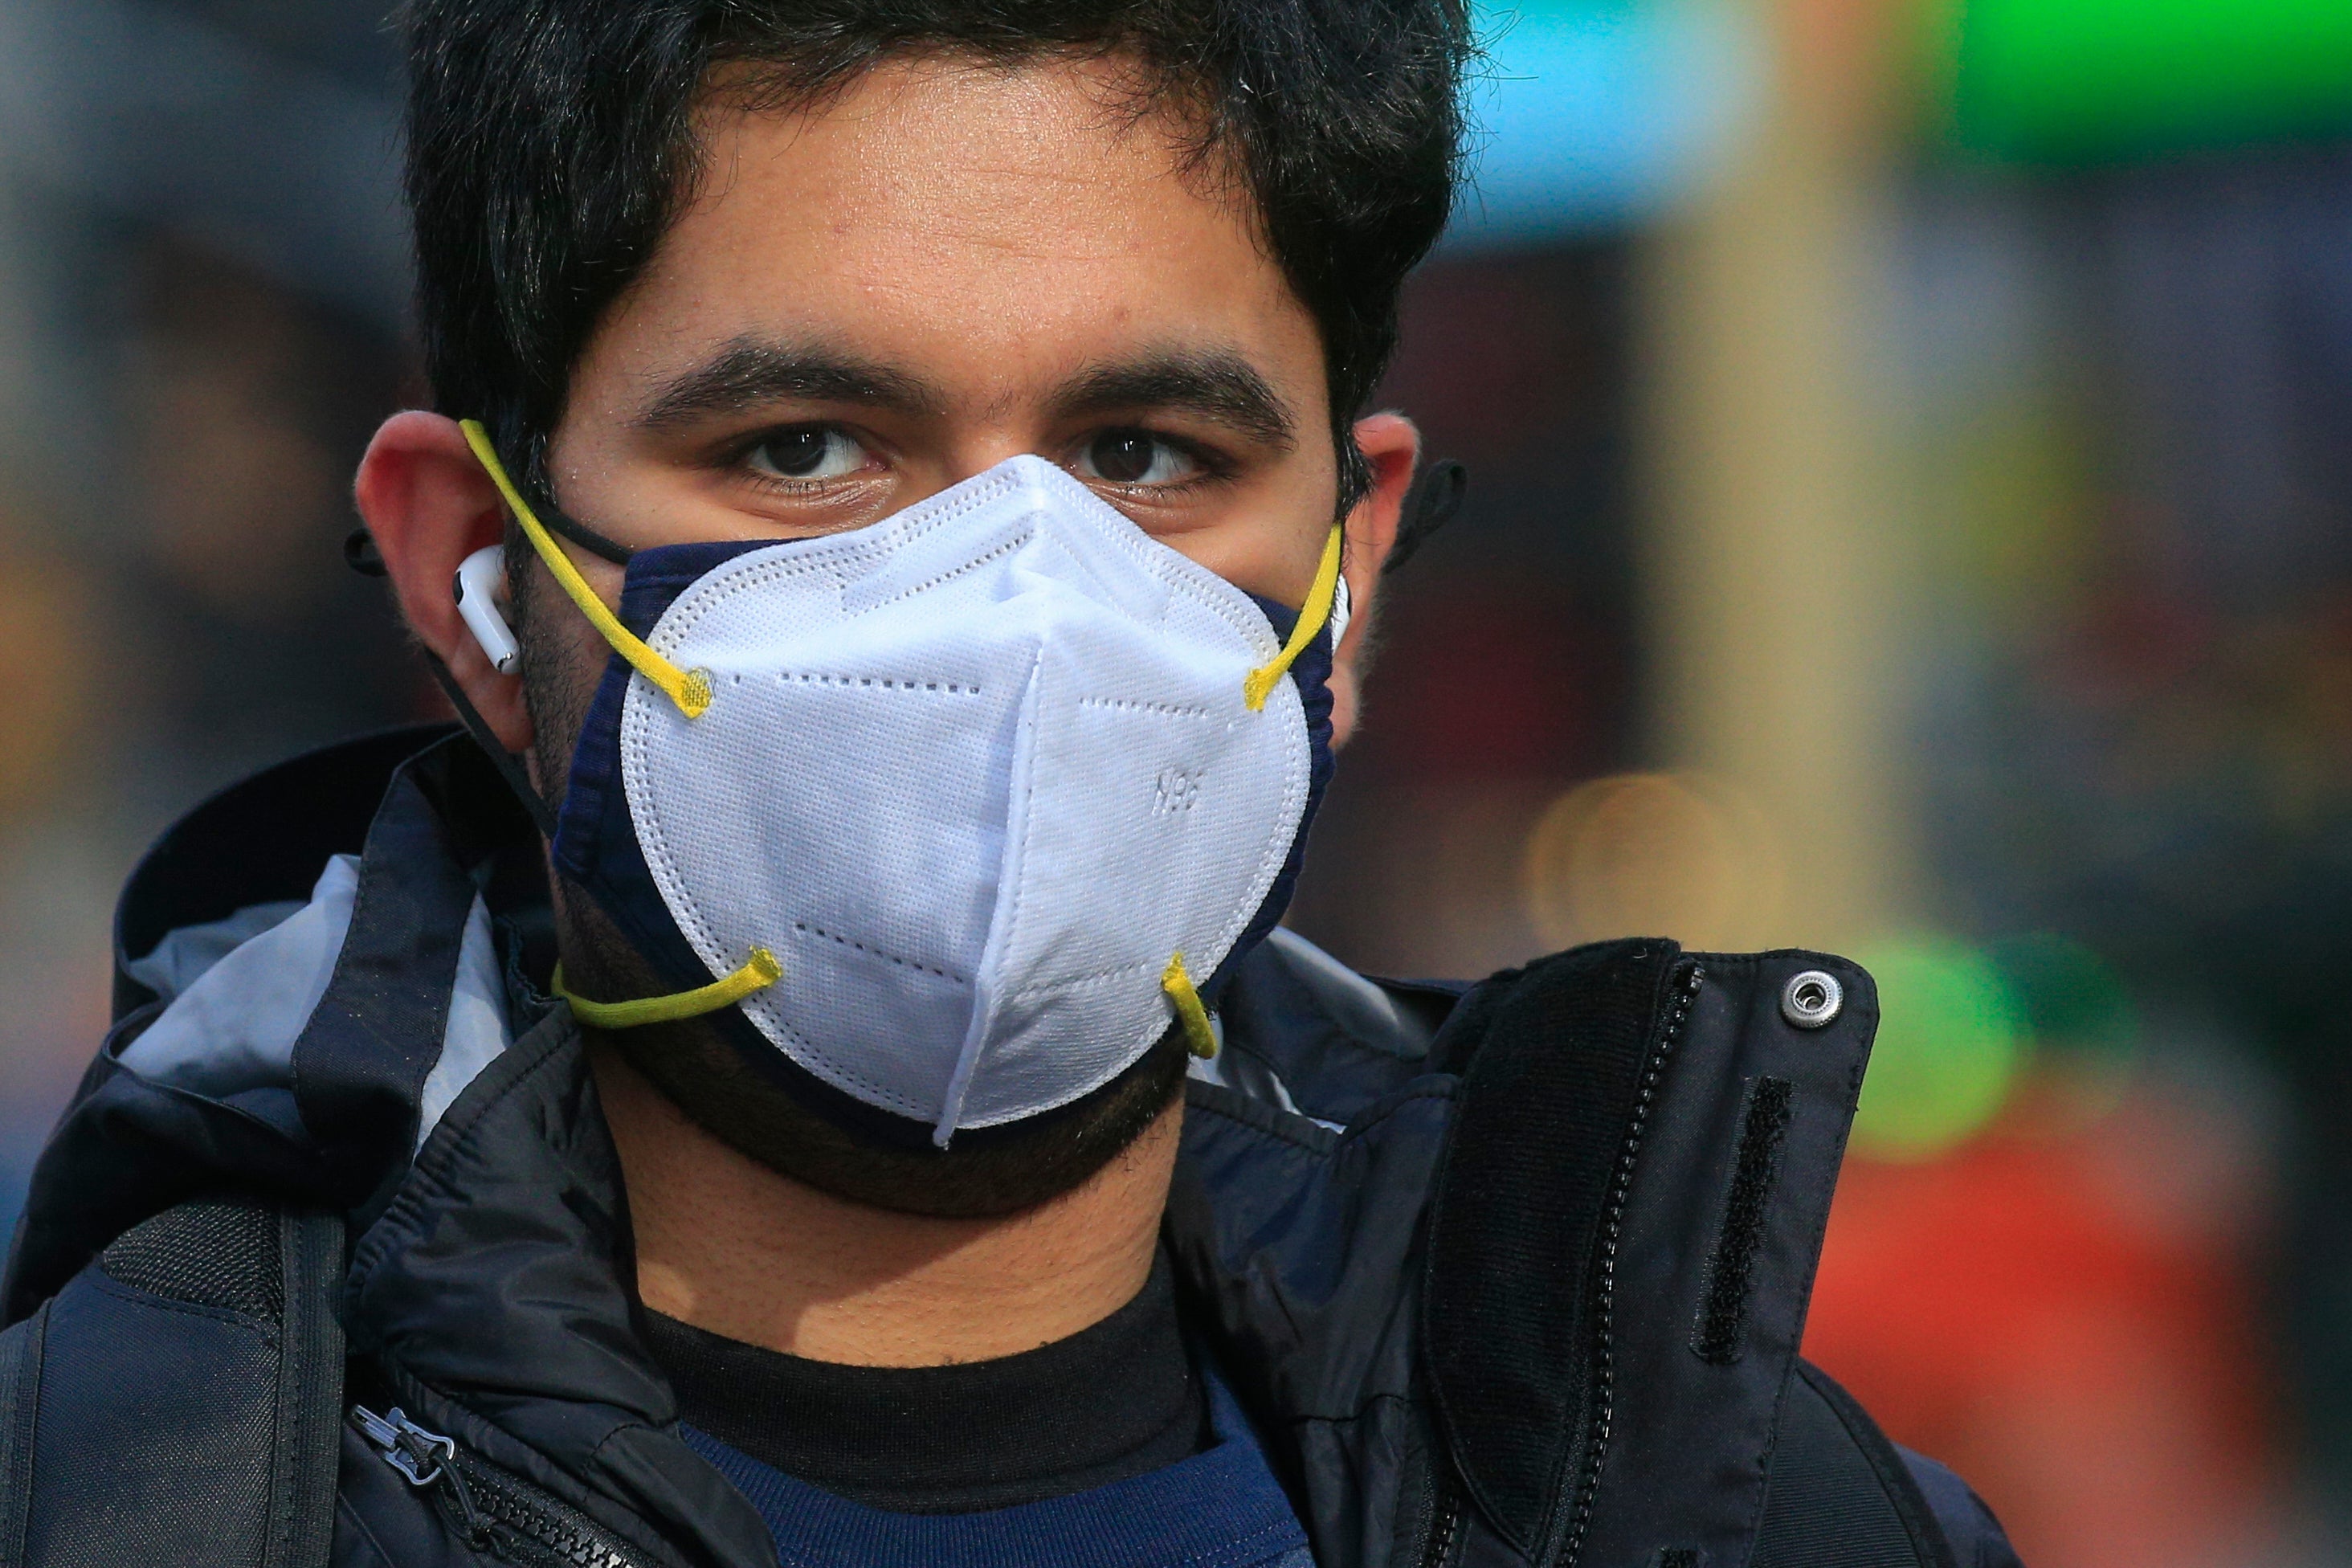 A man wears a double mask as he visits Times Square in New York